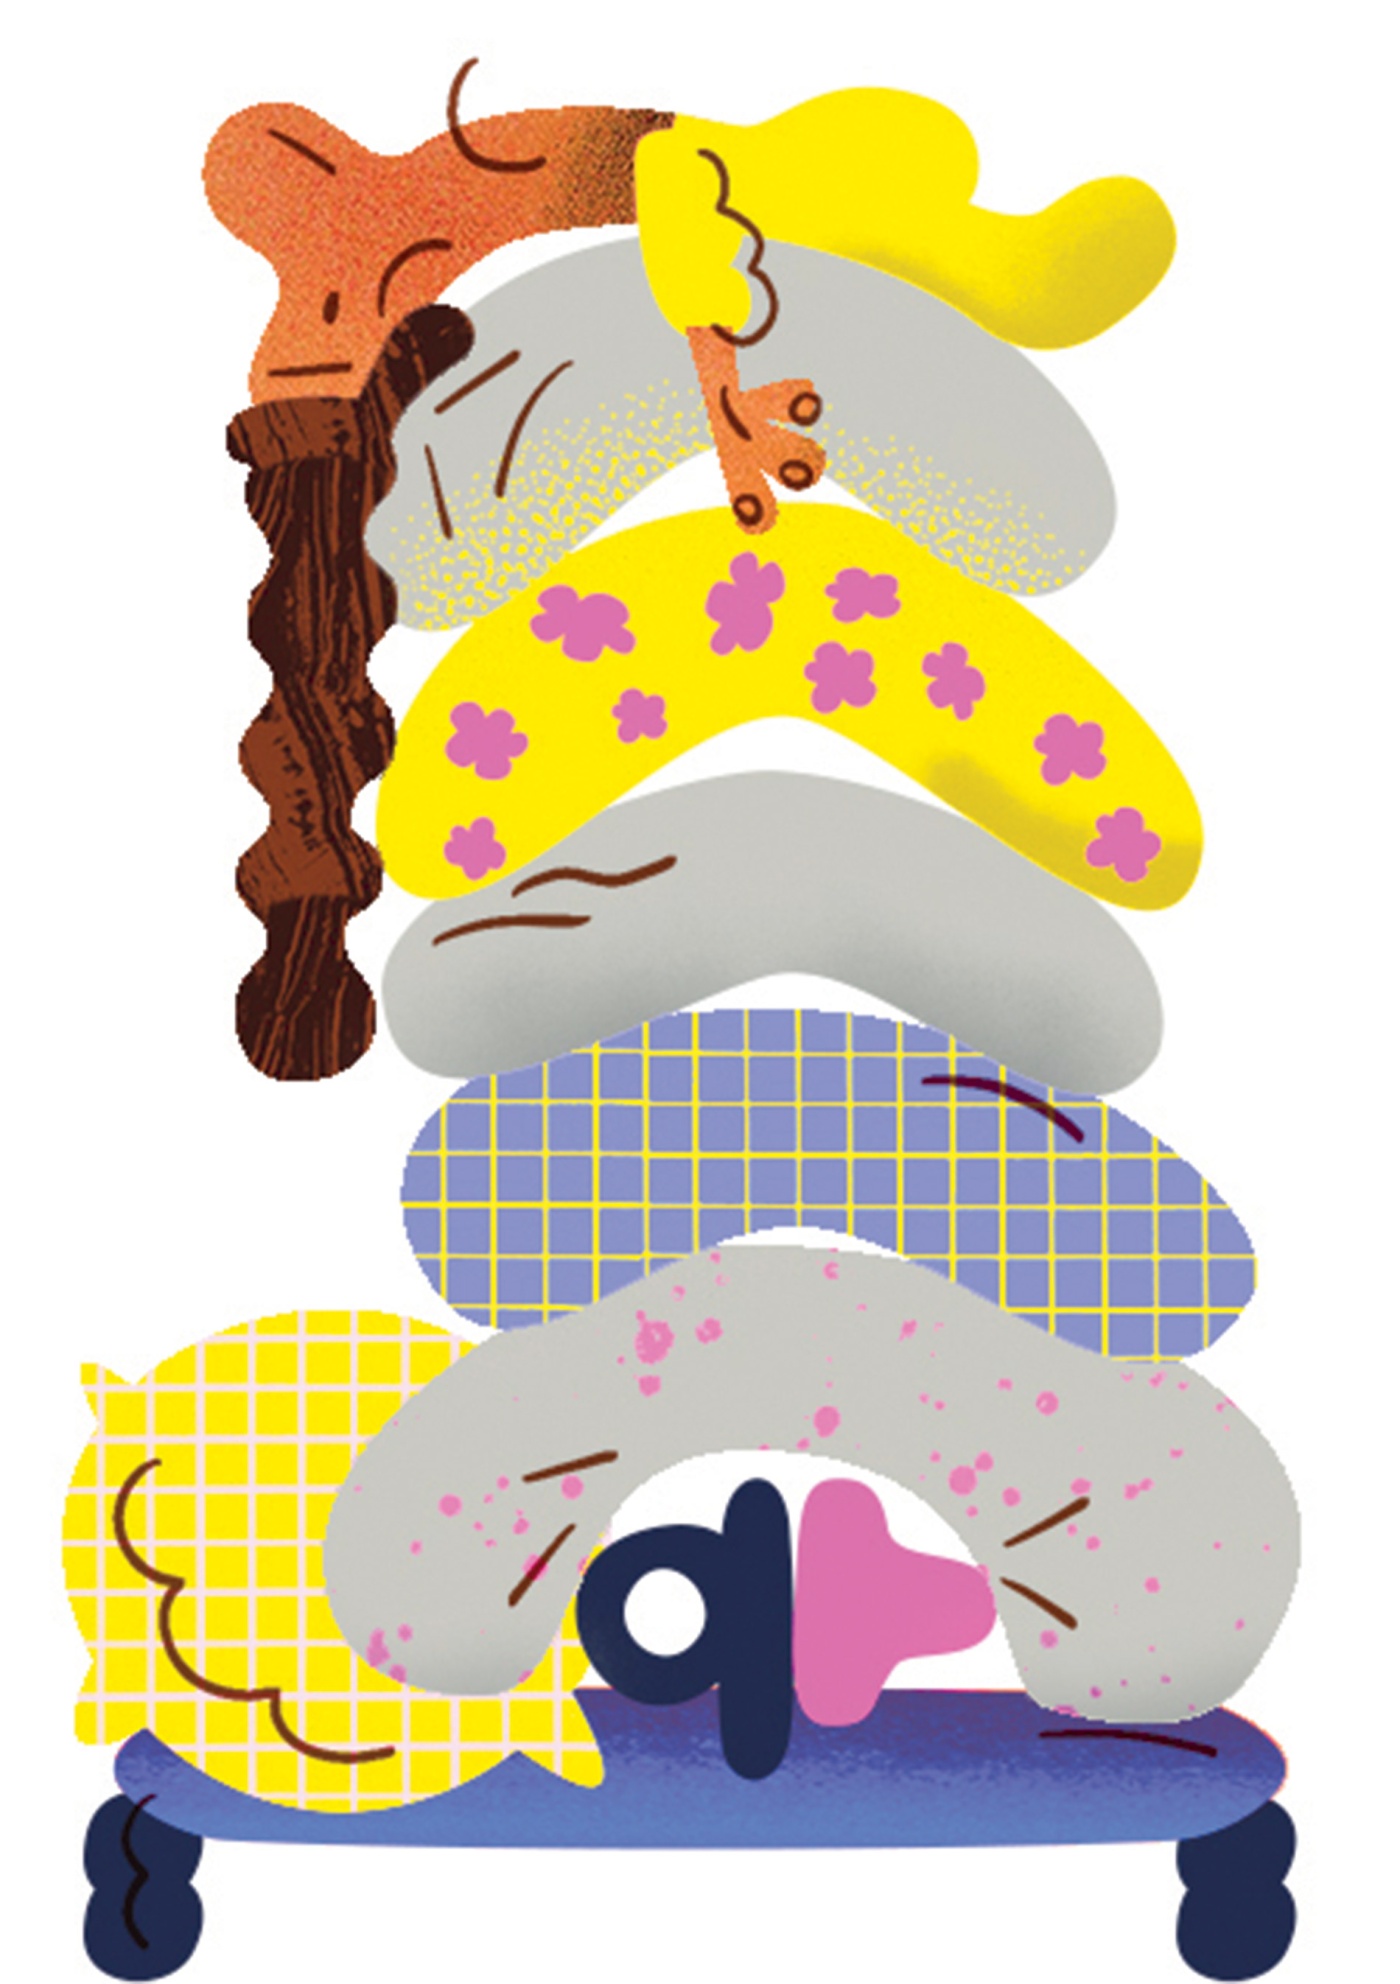 Illustration by Ola Niepsuj of a person sleeping on top of a pile of pillows with a pacifier underneath. 